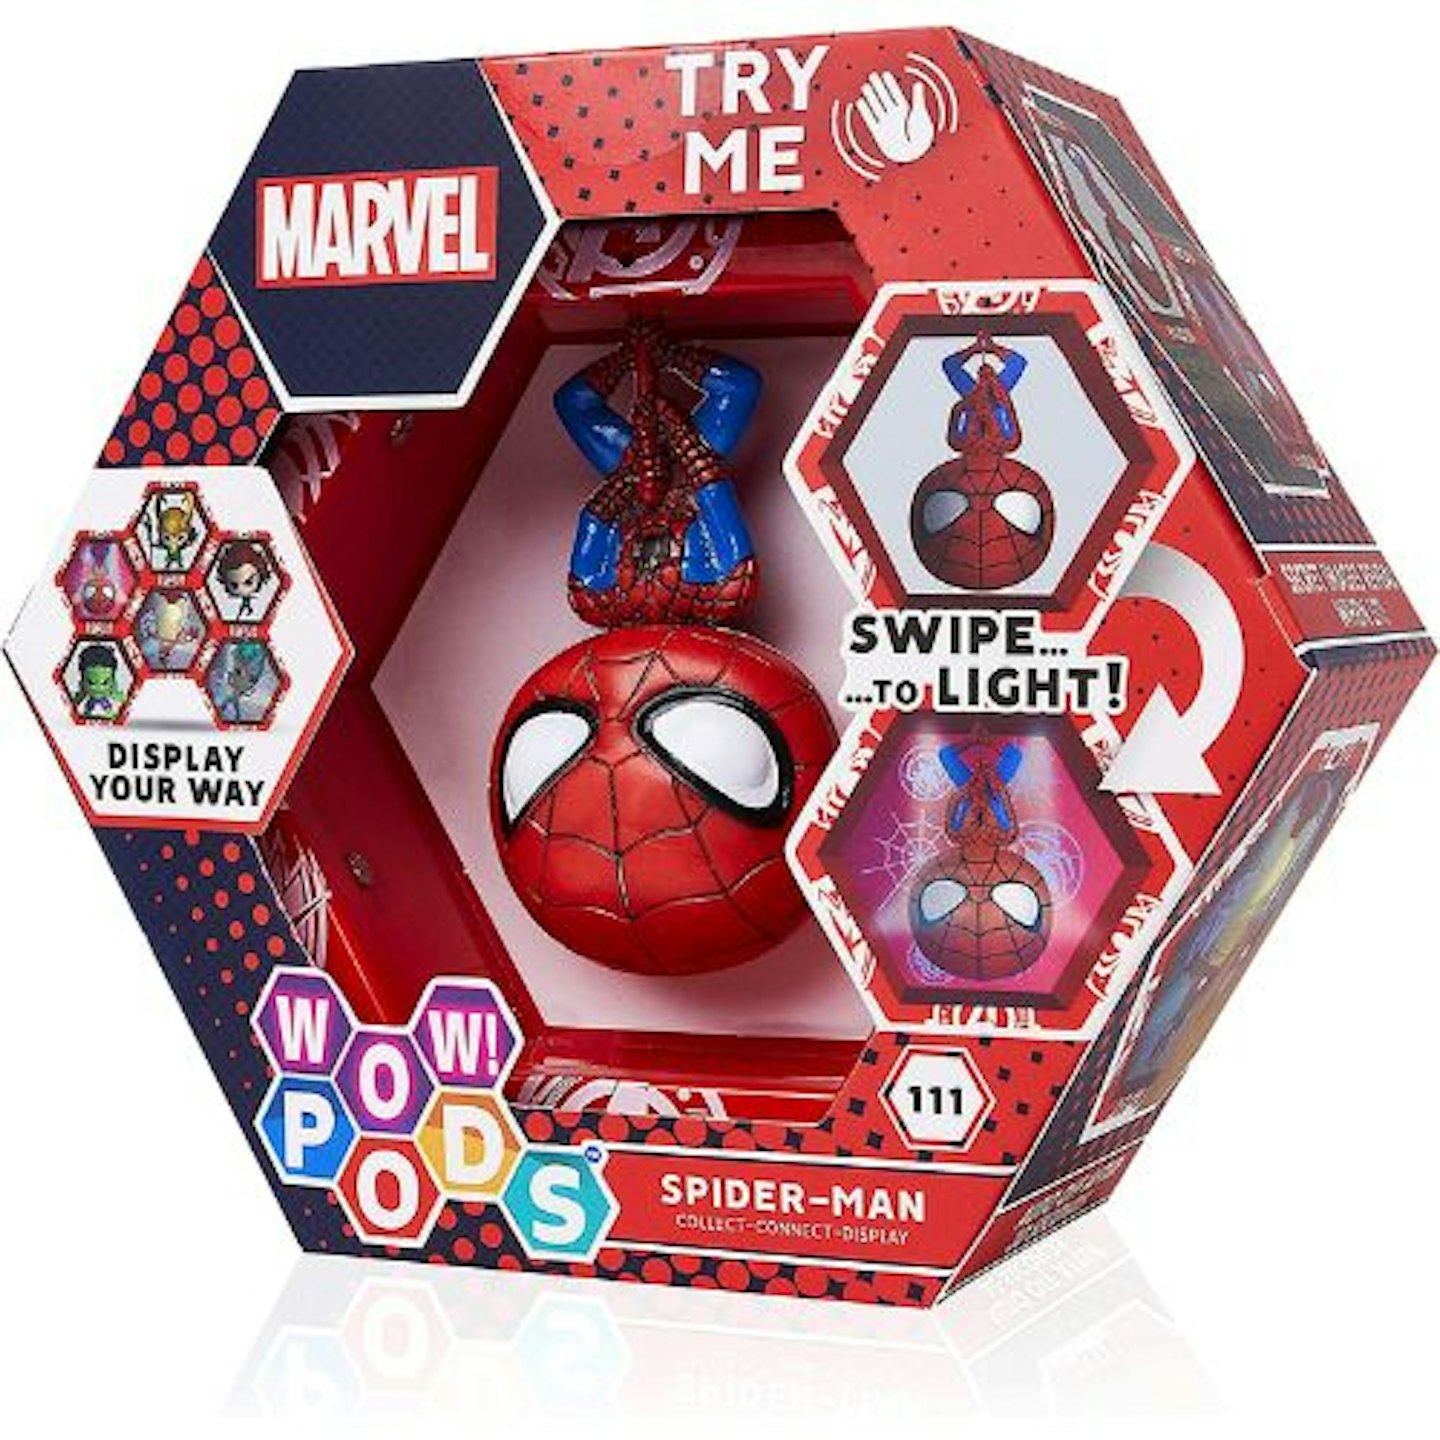 WOW! PODS Avengers Collection - Spider-Man